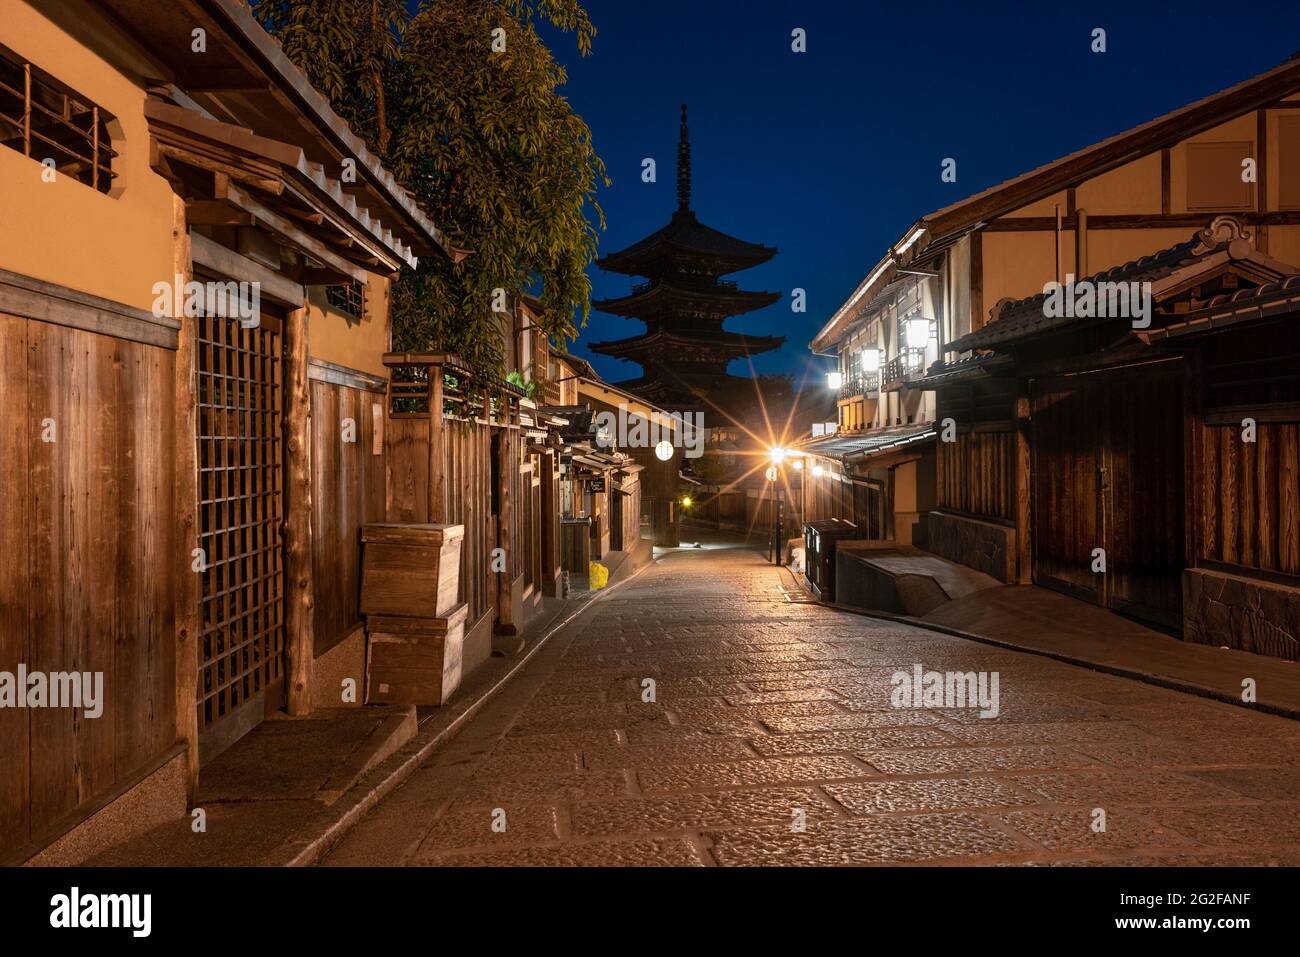 Ancient Buddhist temple of Hokan-ji in old town of Kyoto in the early night, viewed from narrow street below. Blue glowing sky contrasts with traditio Stock Photo